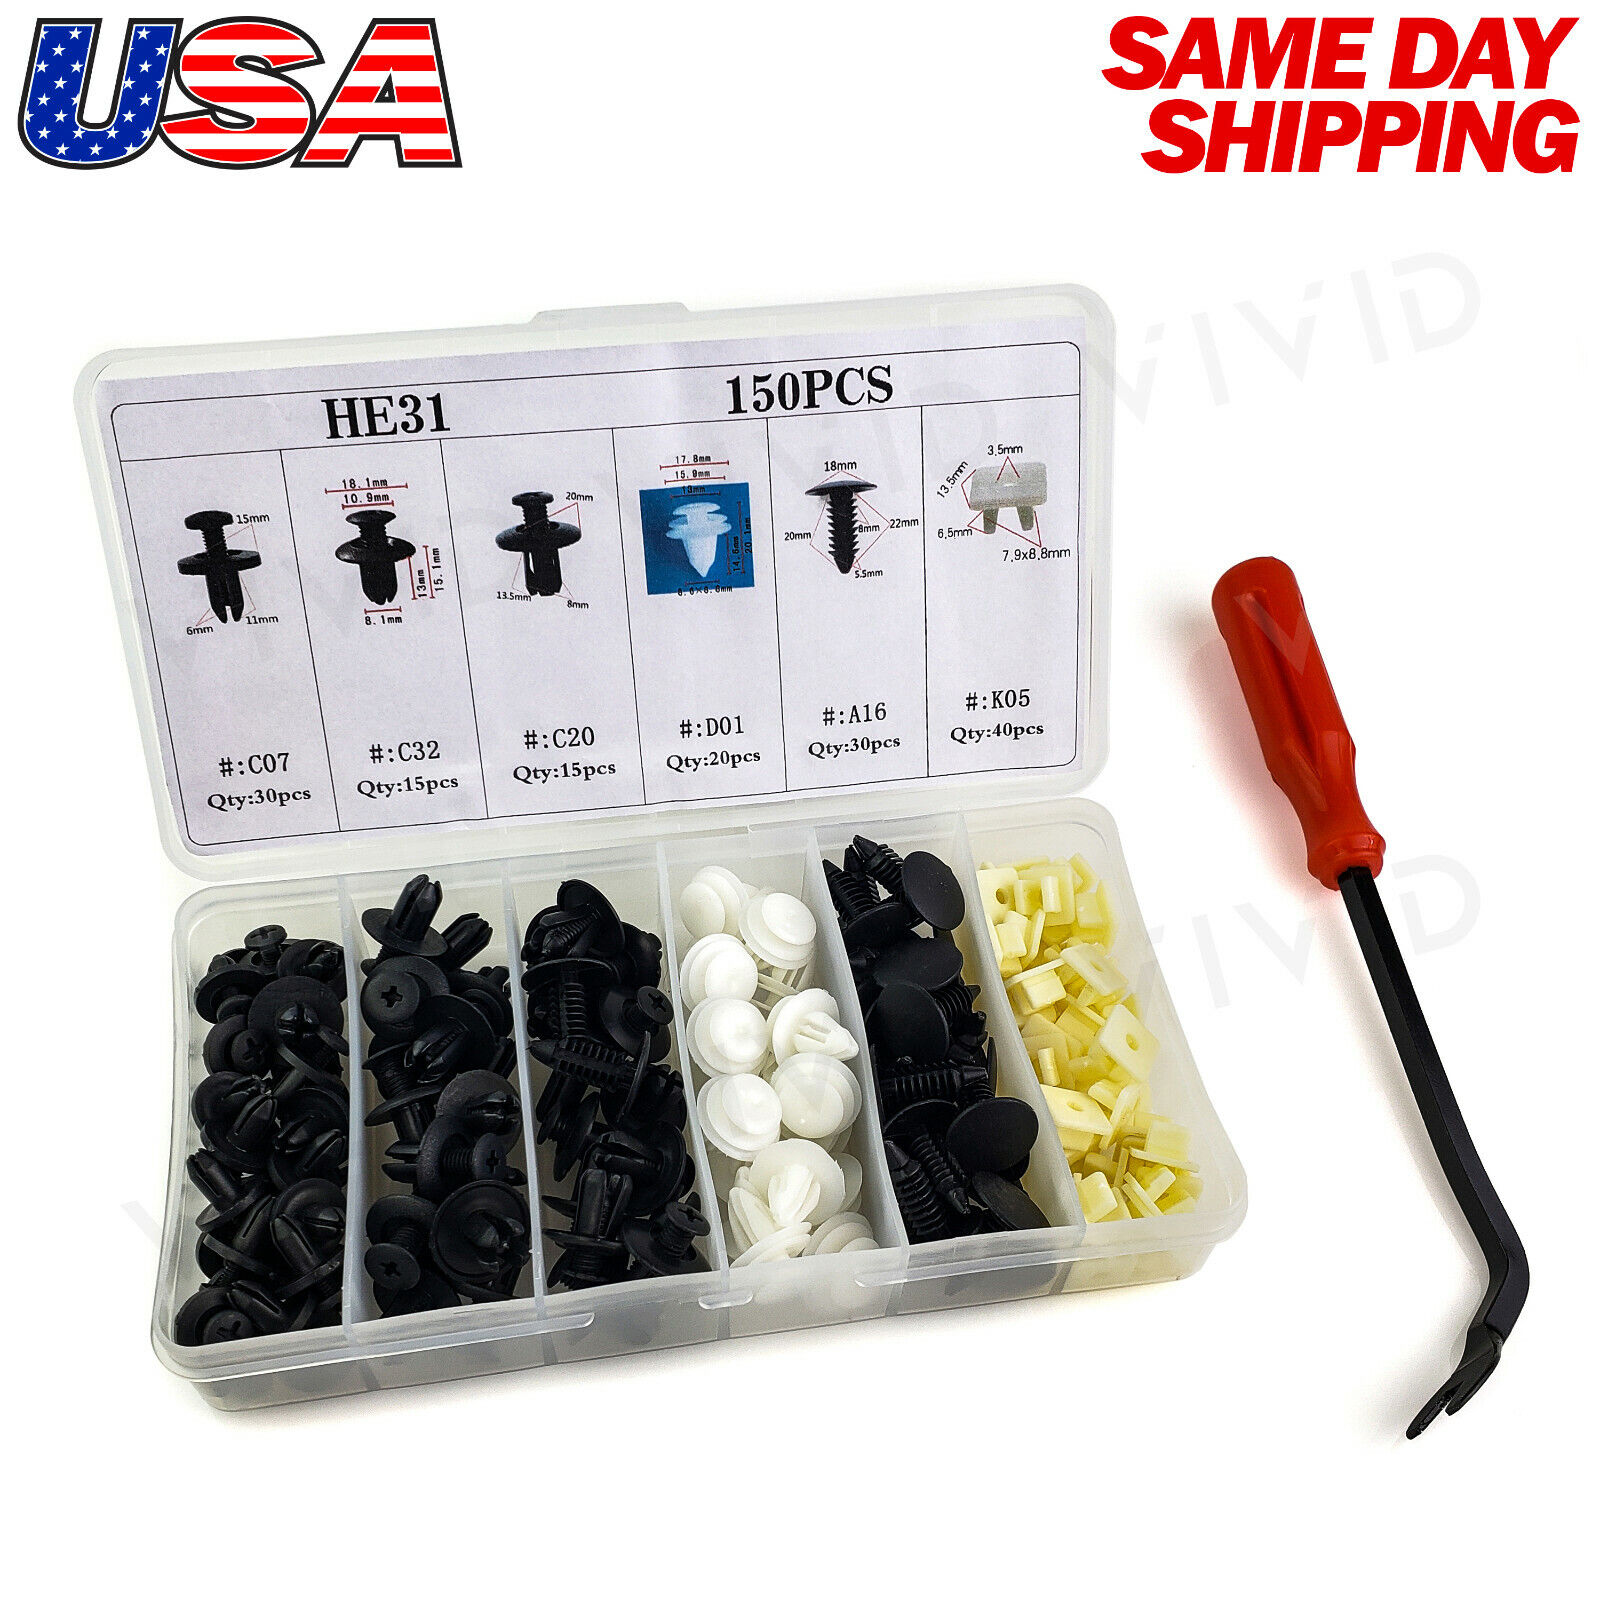 150pc Set Plastic Rivets Fender Bumper Push Pin Clips w/ Removal Tool for Dodge